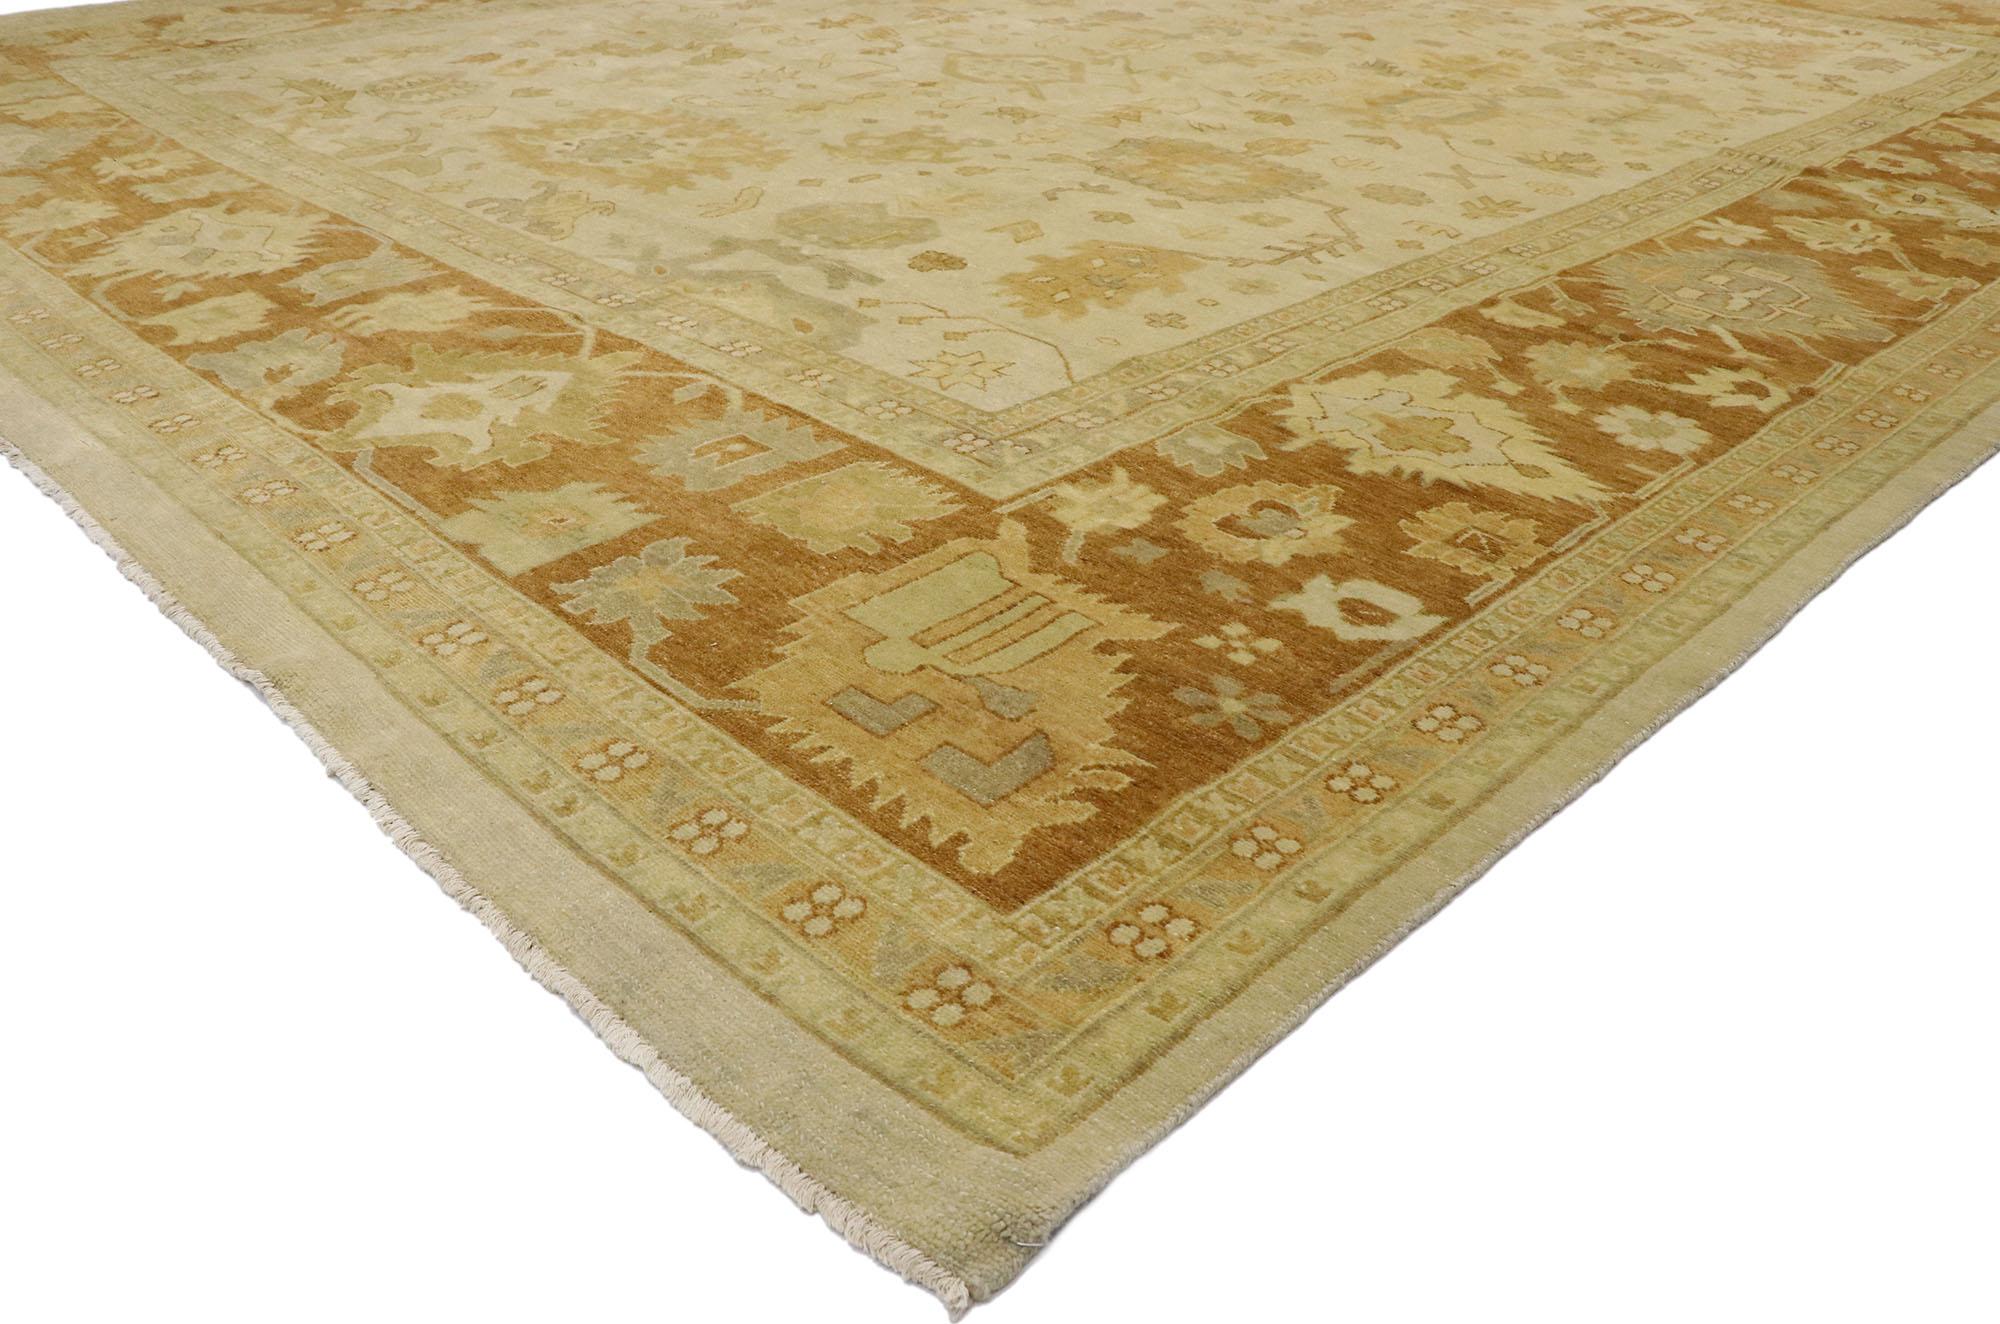 30175 new Contemporary Indian Oushak rug with Rustic Cottage Southern Living style 12'03 x 14'09. Warm and collected, this modern rustic Oushak style rug brims with casual, lived-in charm. Combining these contrasting rural colors and traditional